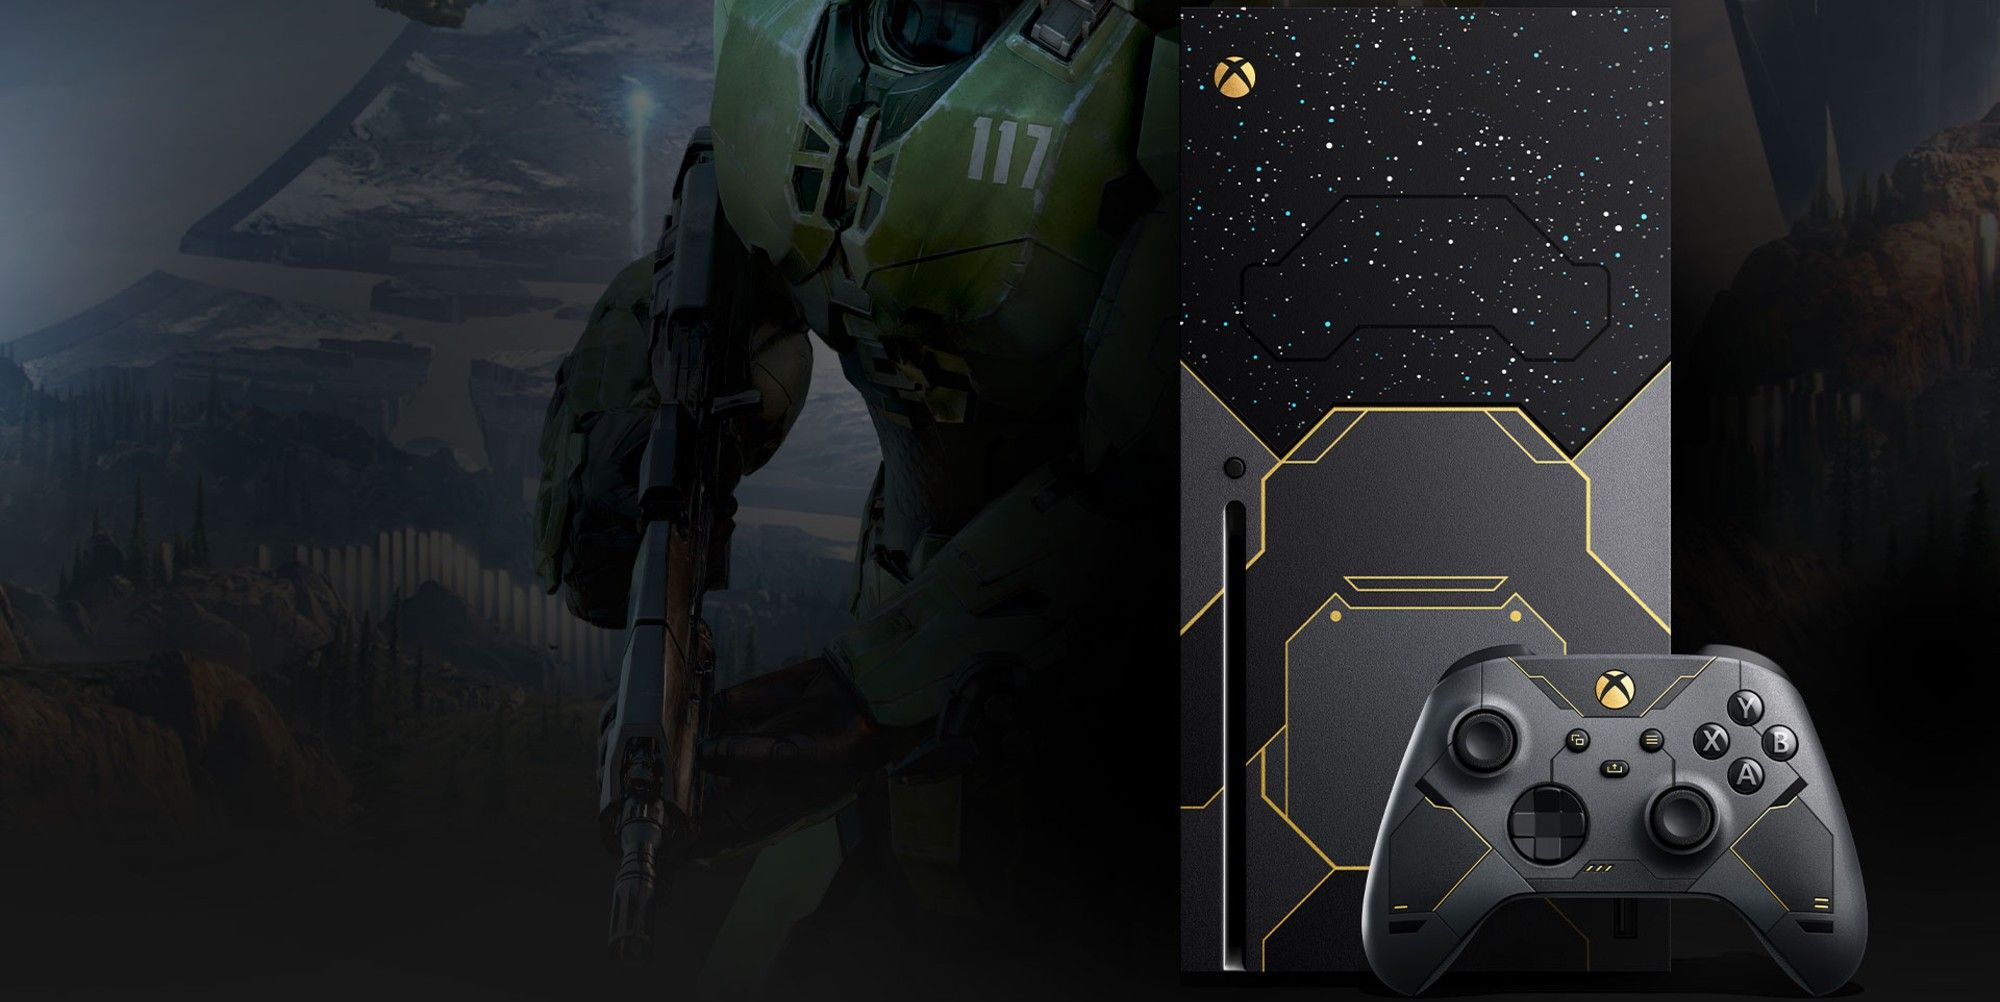 Halo Series X Consoles Are Already Selling On eBay For Thousands Of Dollars